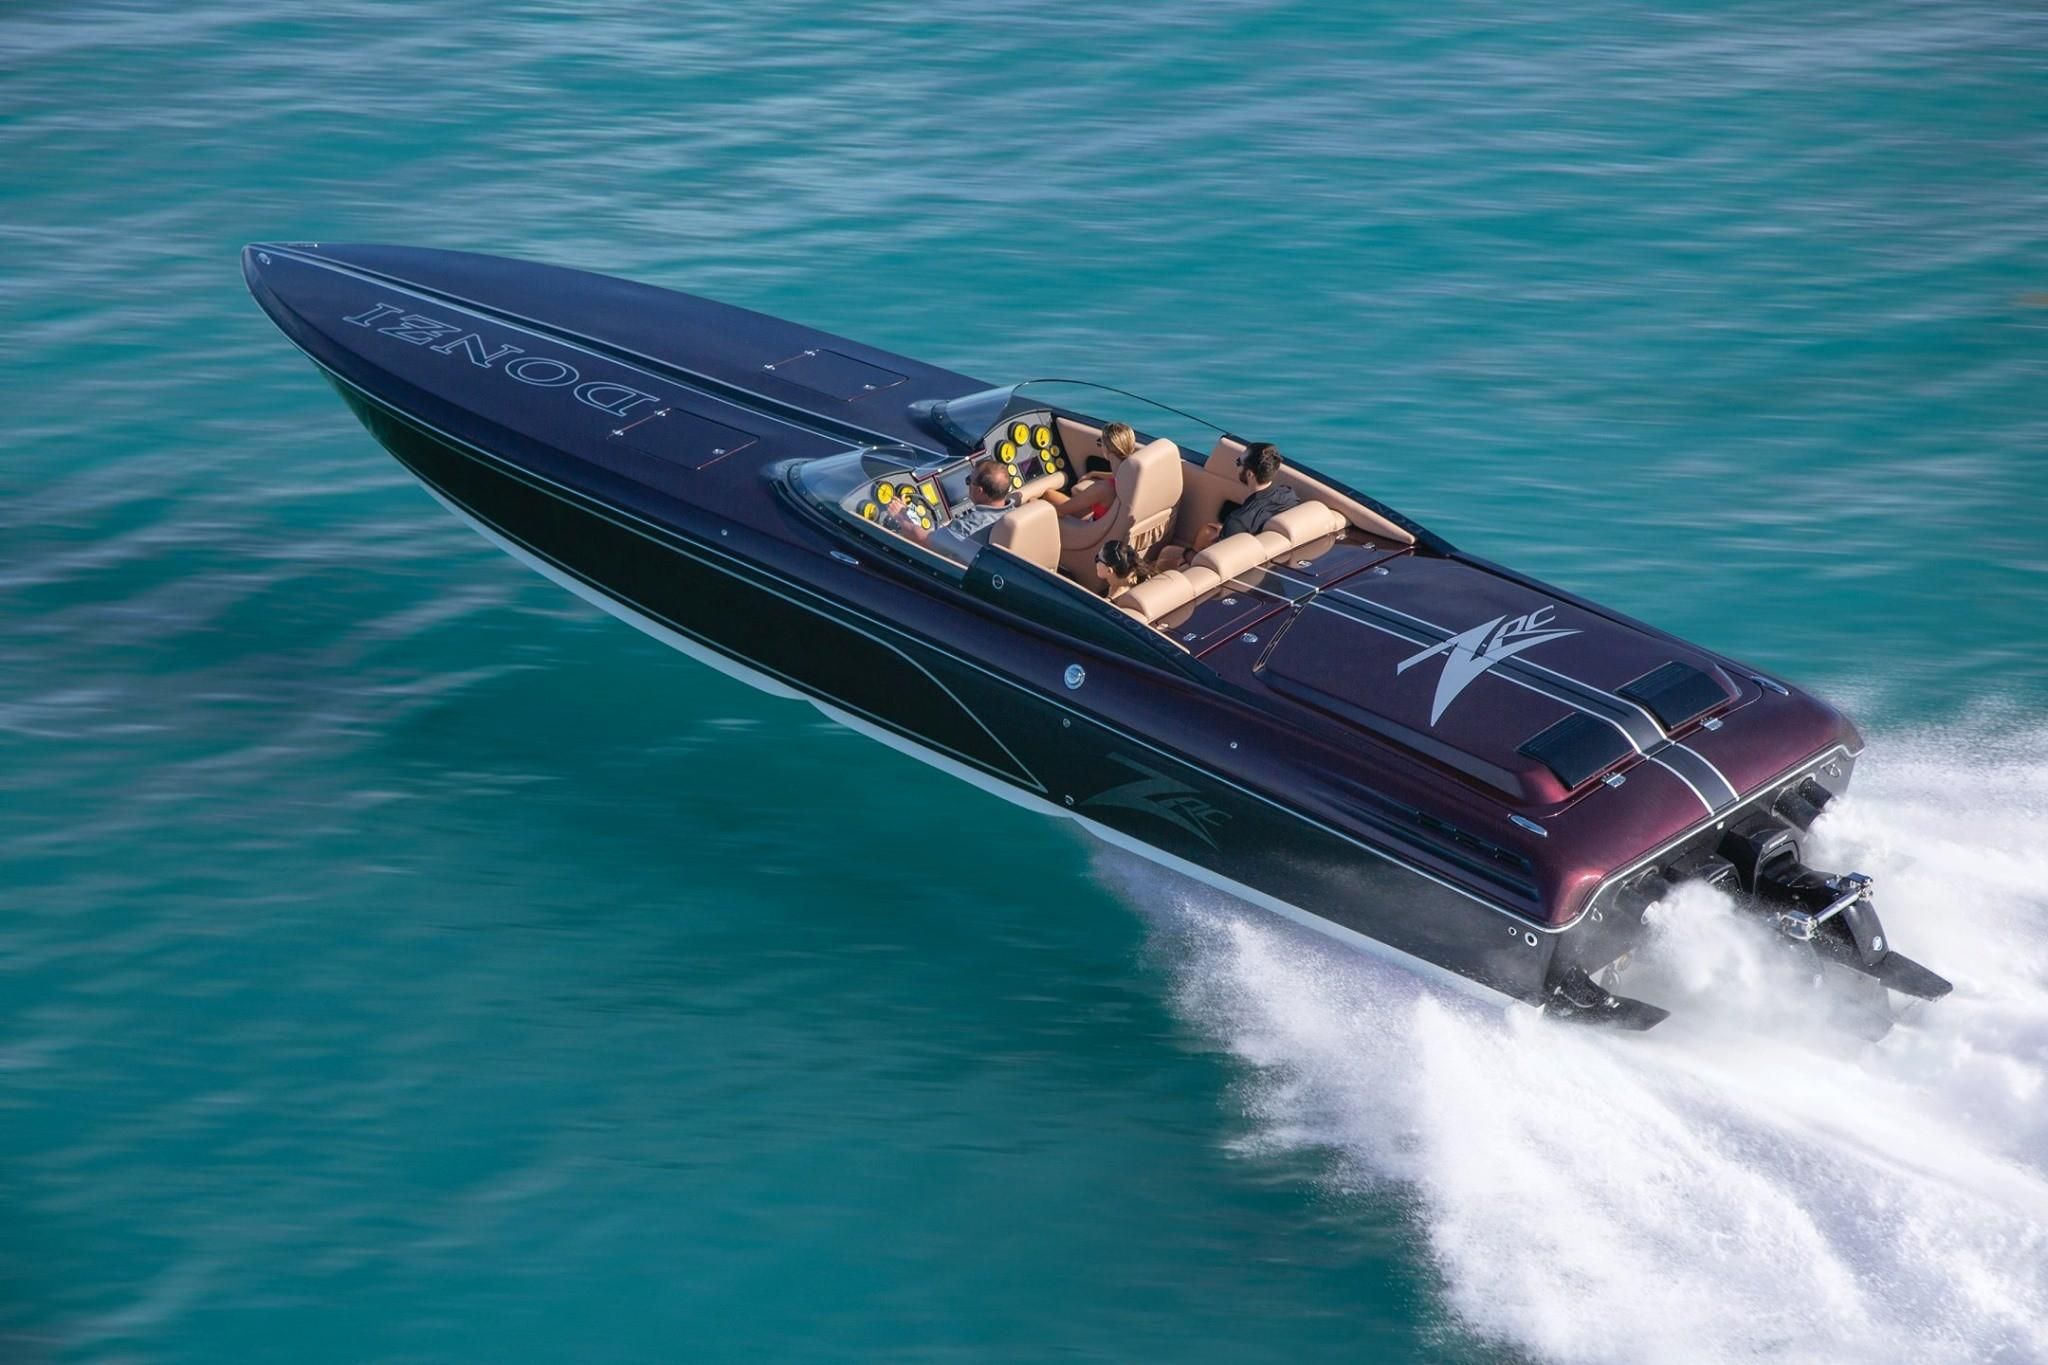 donzi powerboats for sale